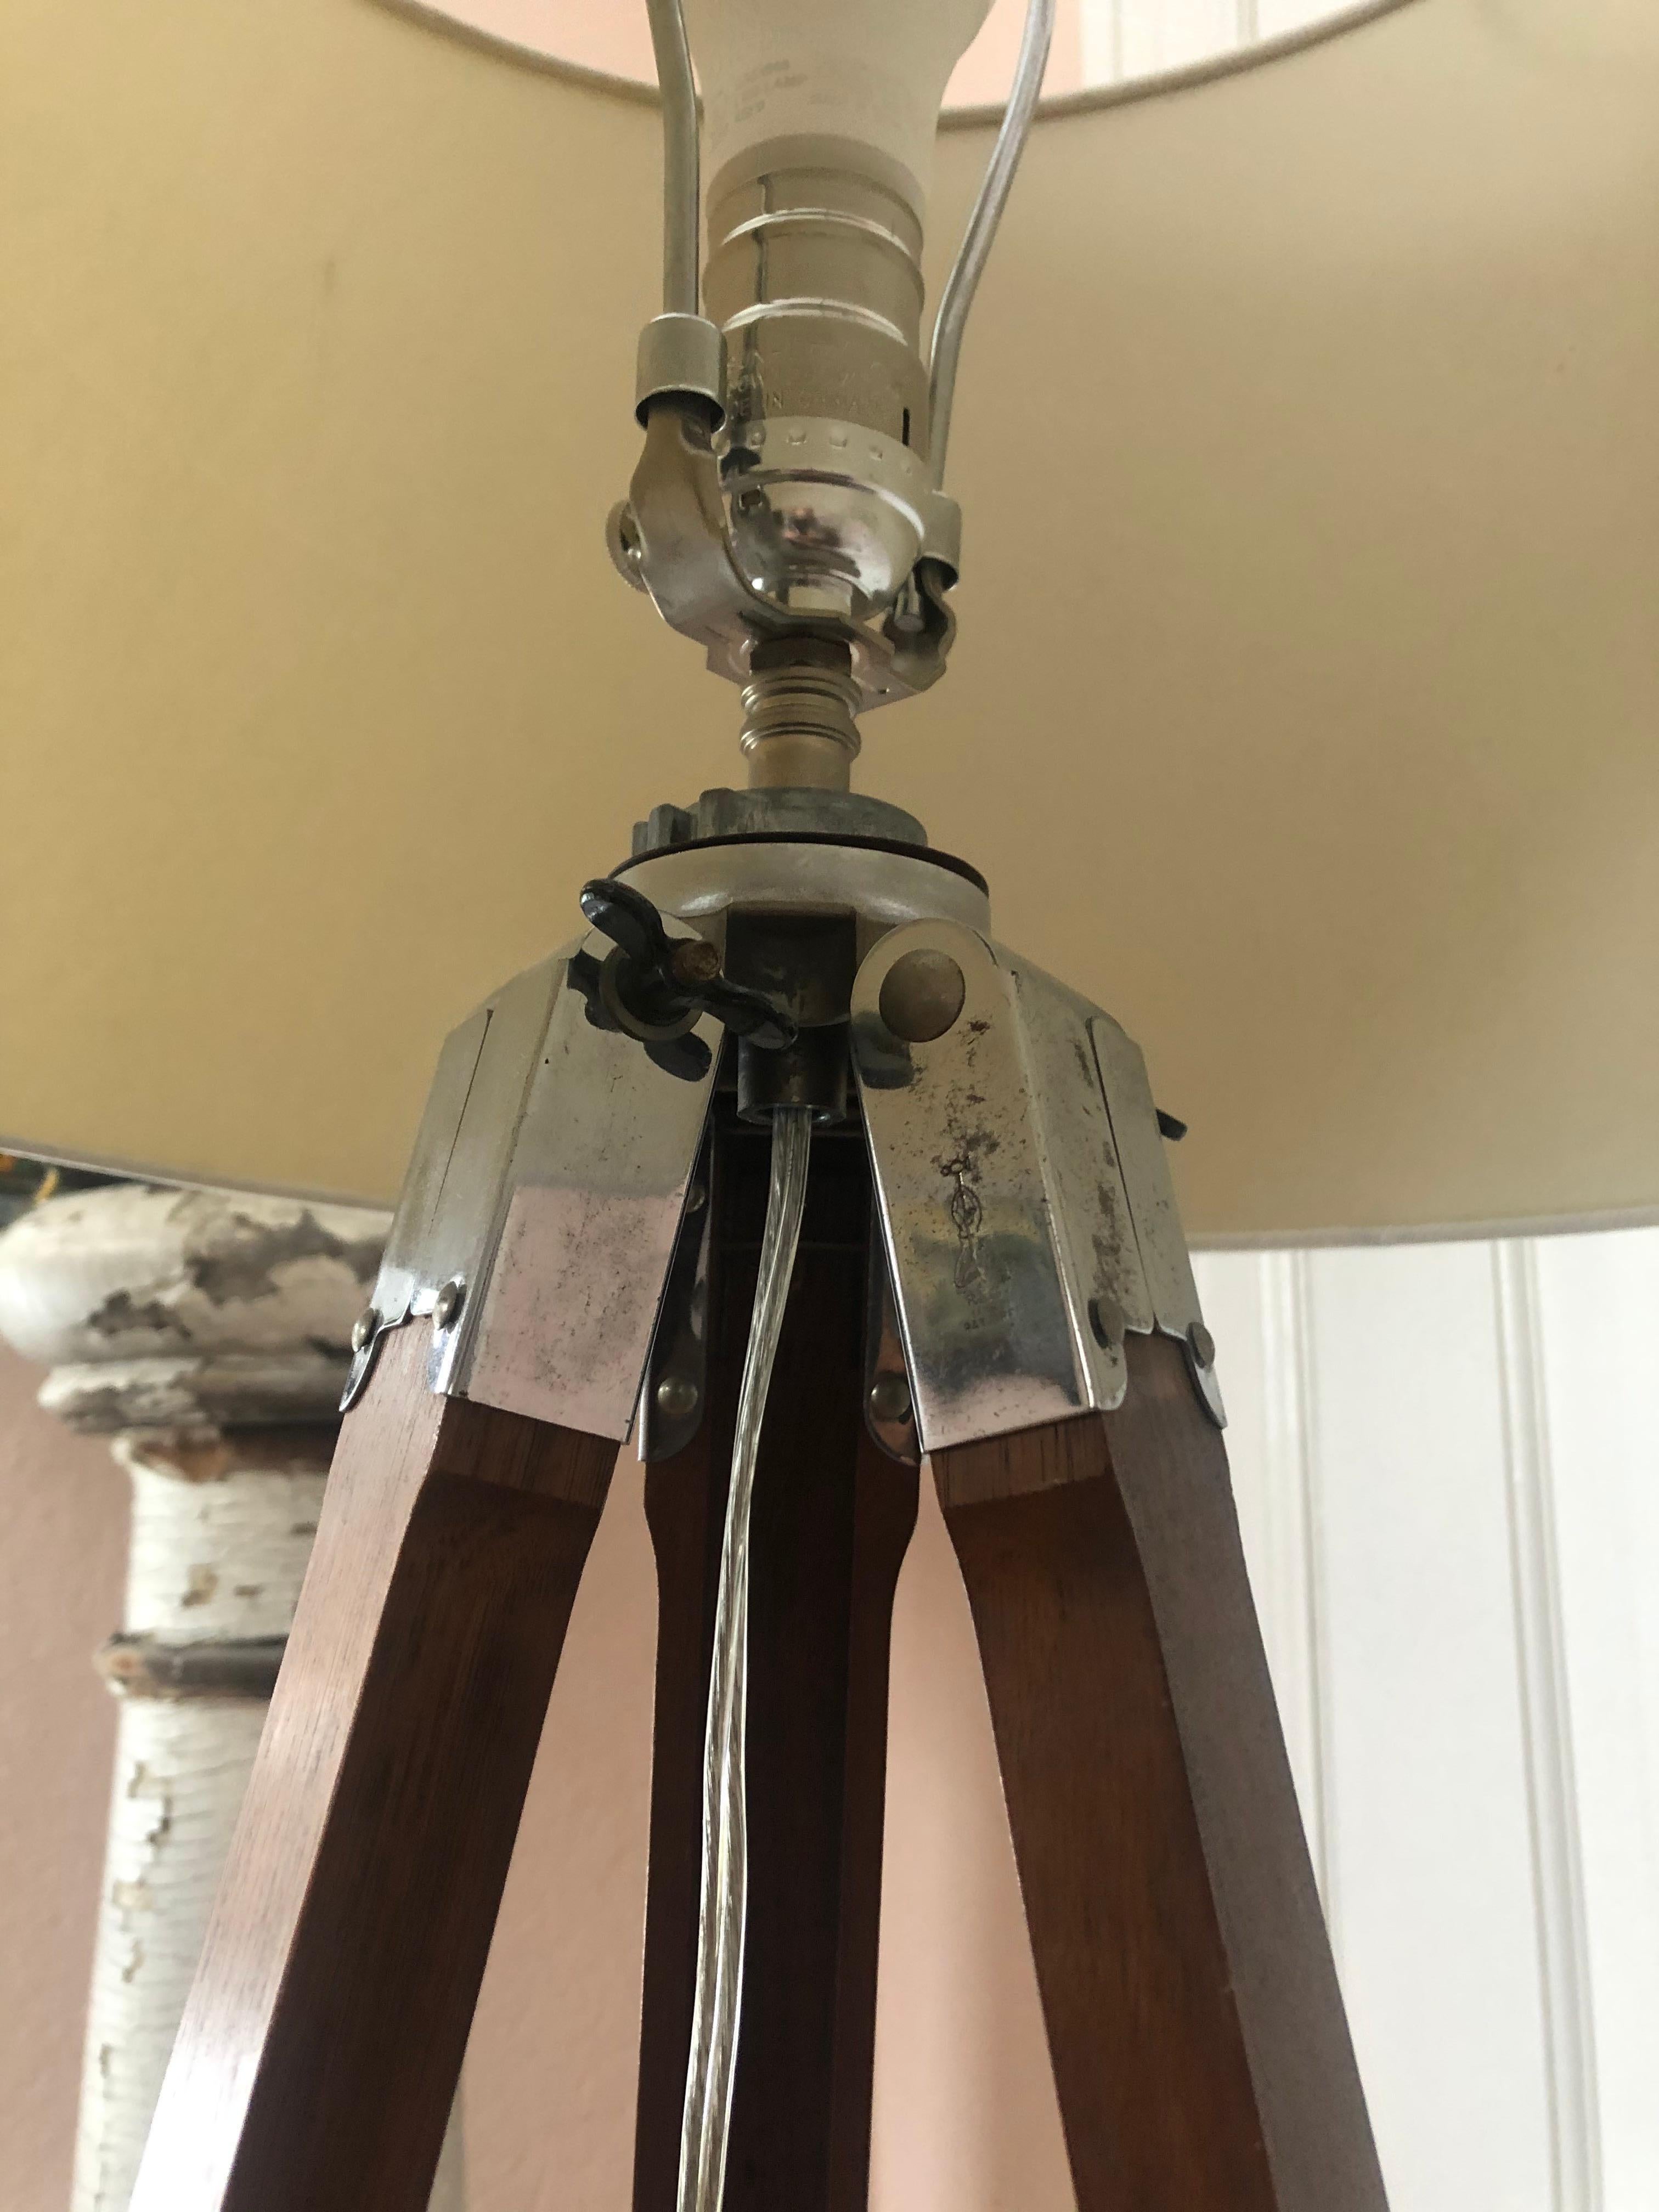 A handsome wood and chrome tripod surveyors stand made into a Classic floor lamp.